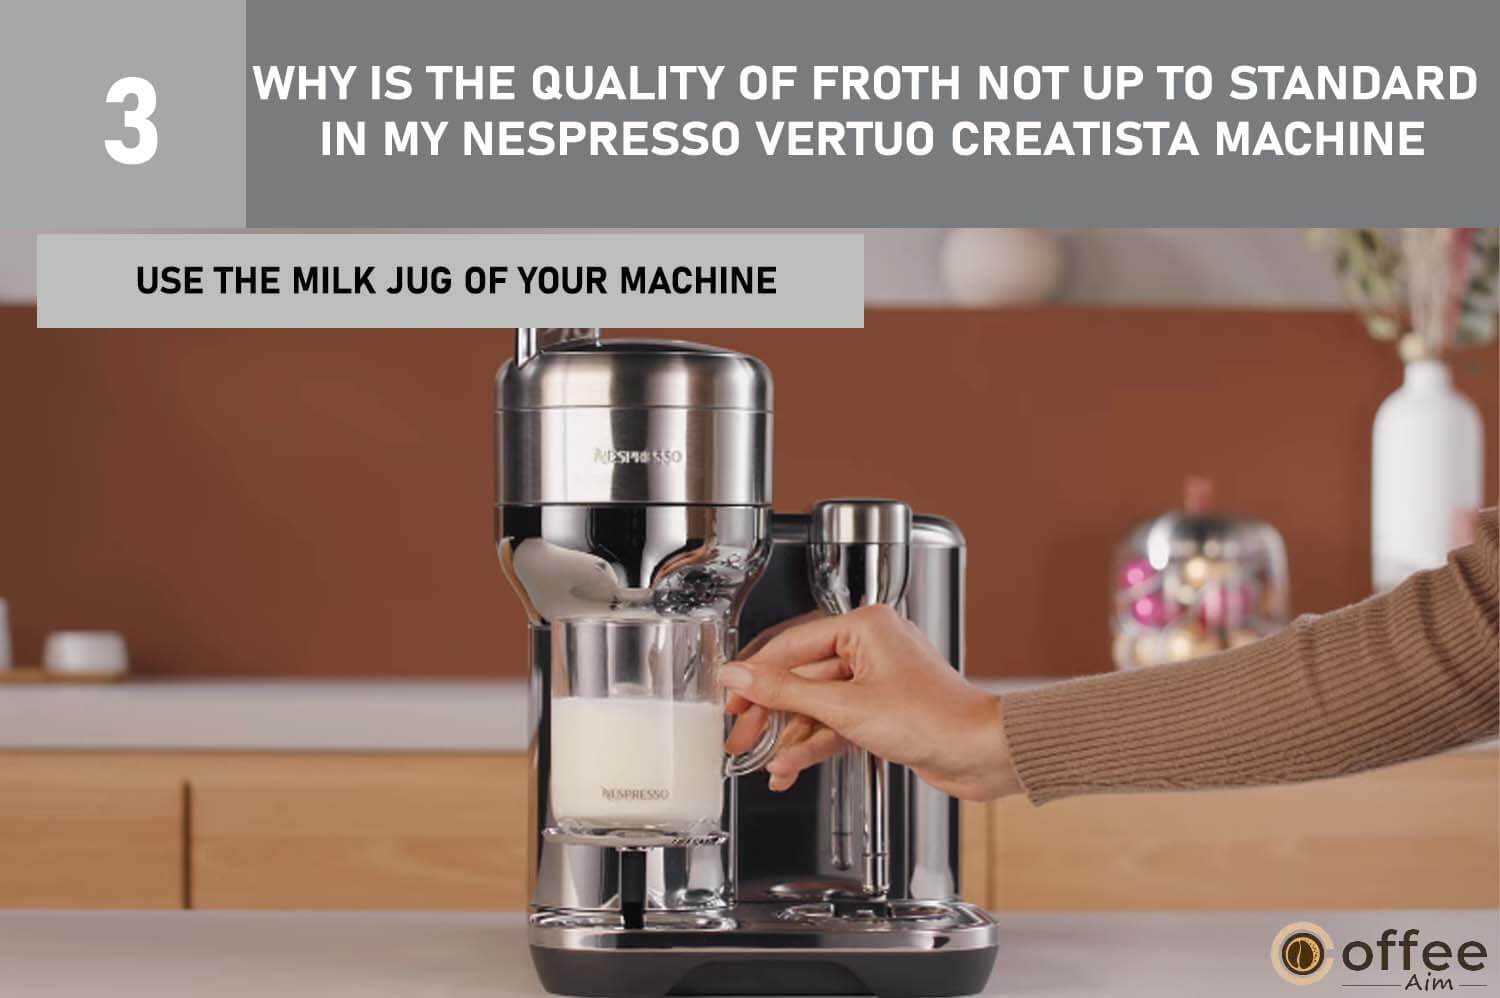 Ensure proper froth quality in your Nespresso Vertuo Creatista by using the machine's milk jug as instructed in the image.